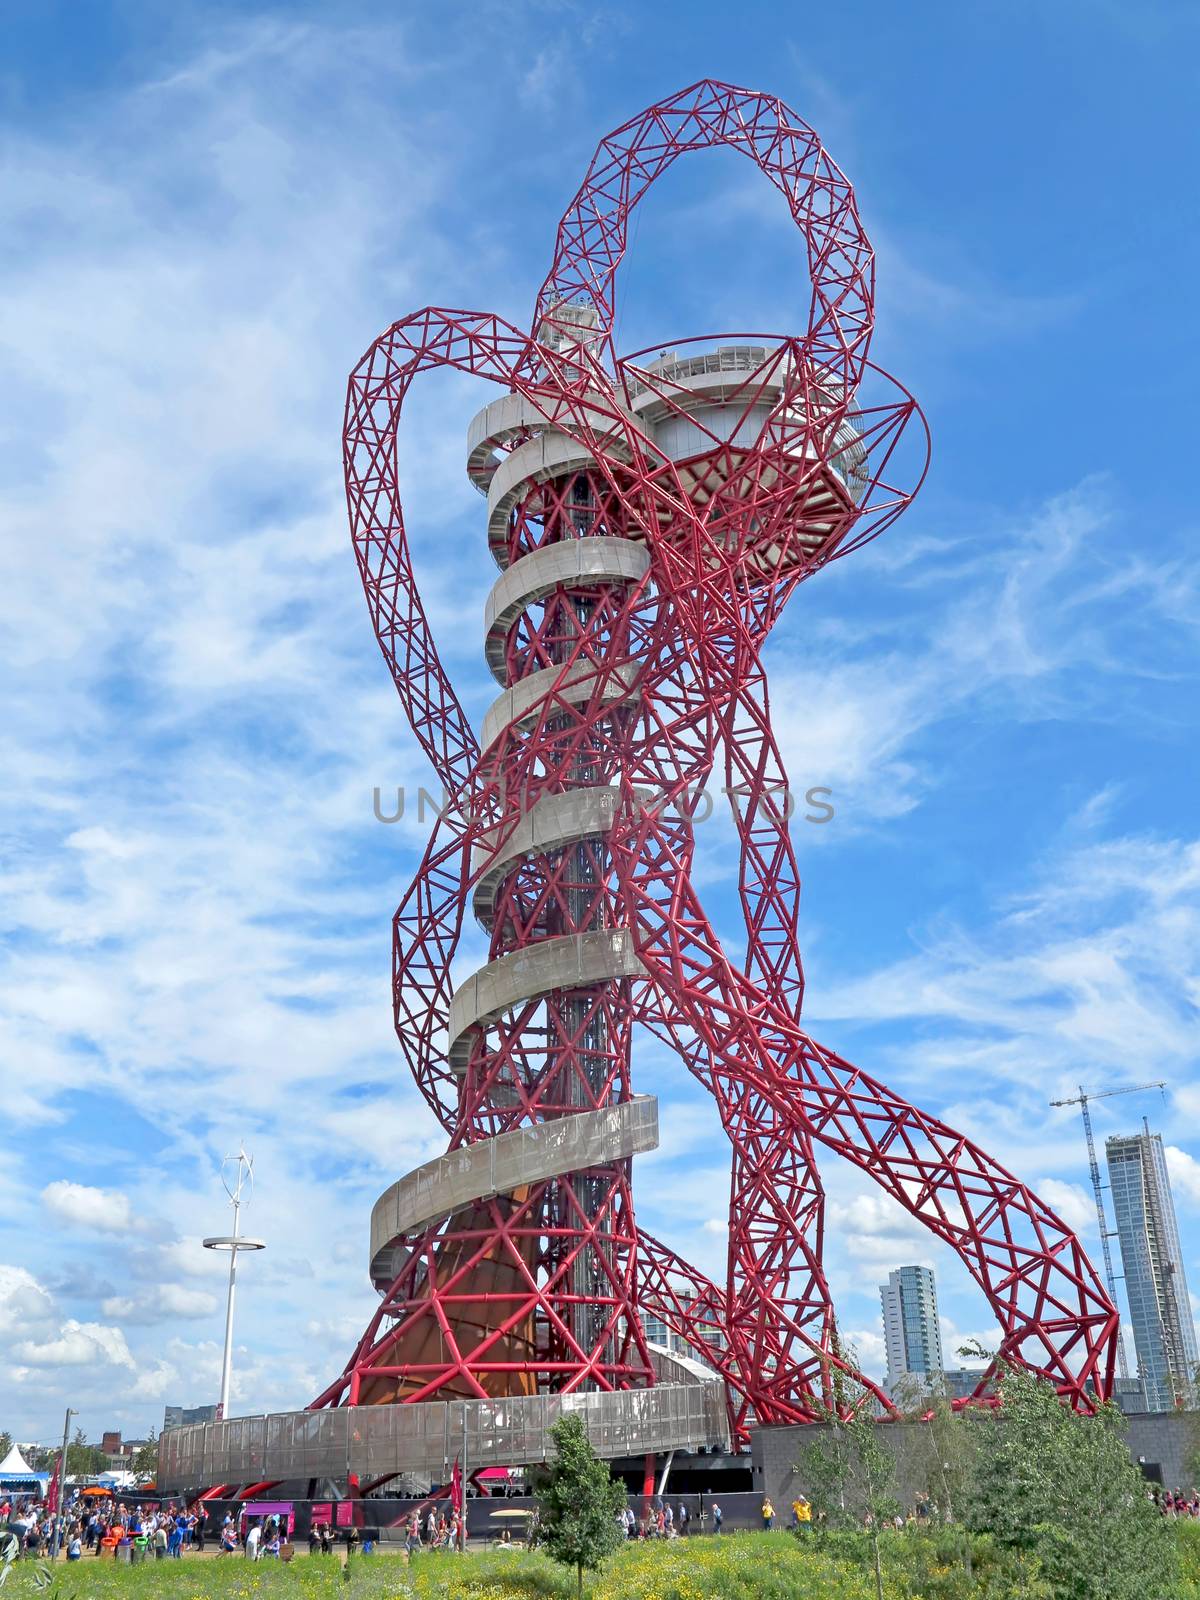 LONDON, ENGLAND - August 3, 2012 - The ArcelorMittal Orbit at London Olympic Park for the Summer 2012 Olympics